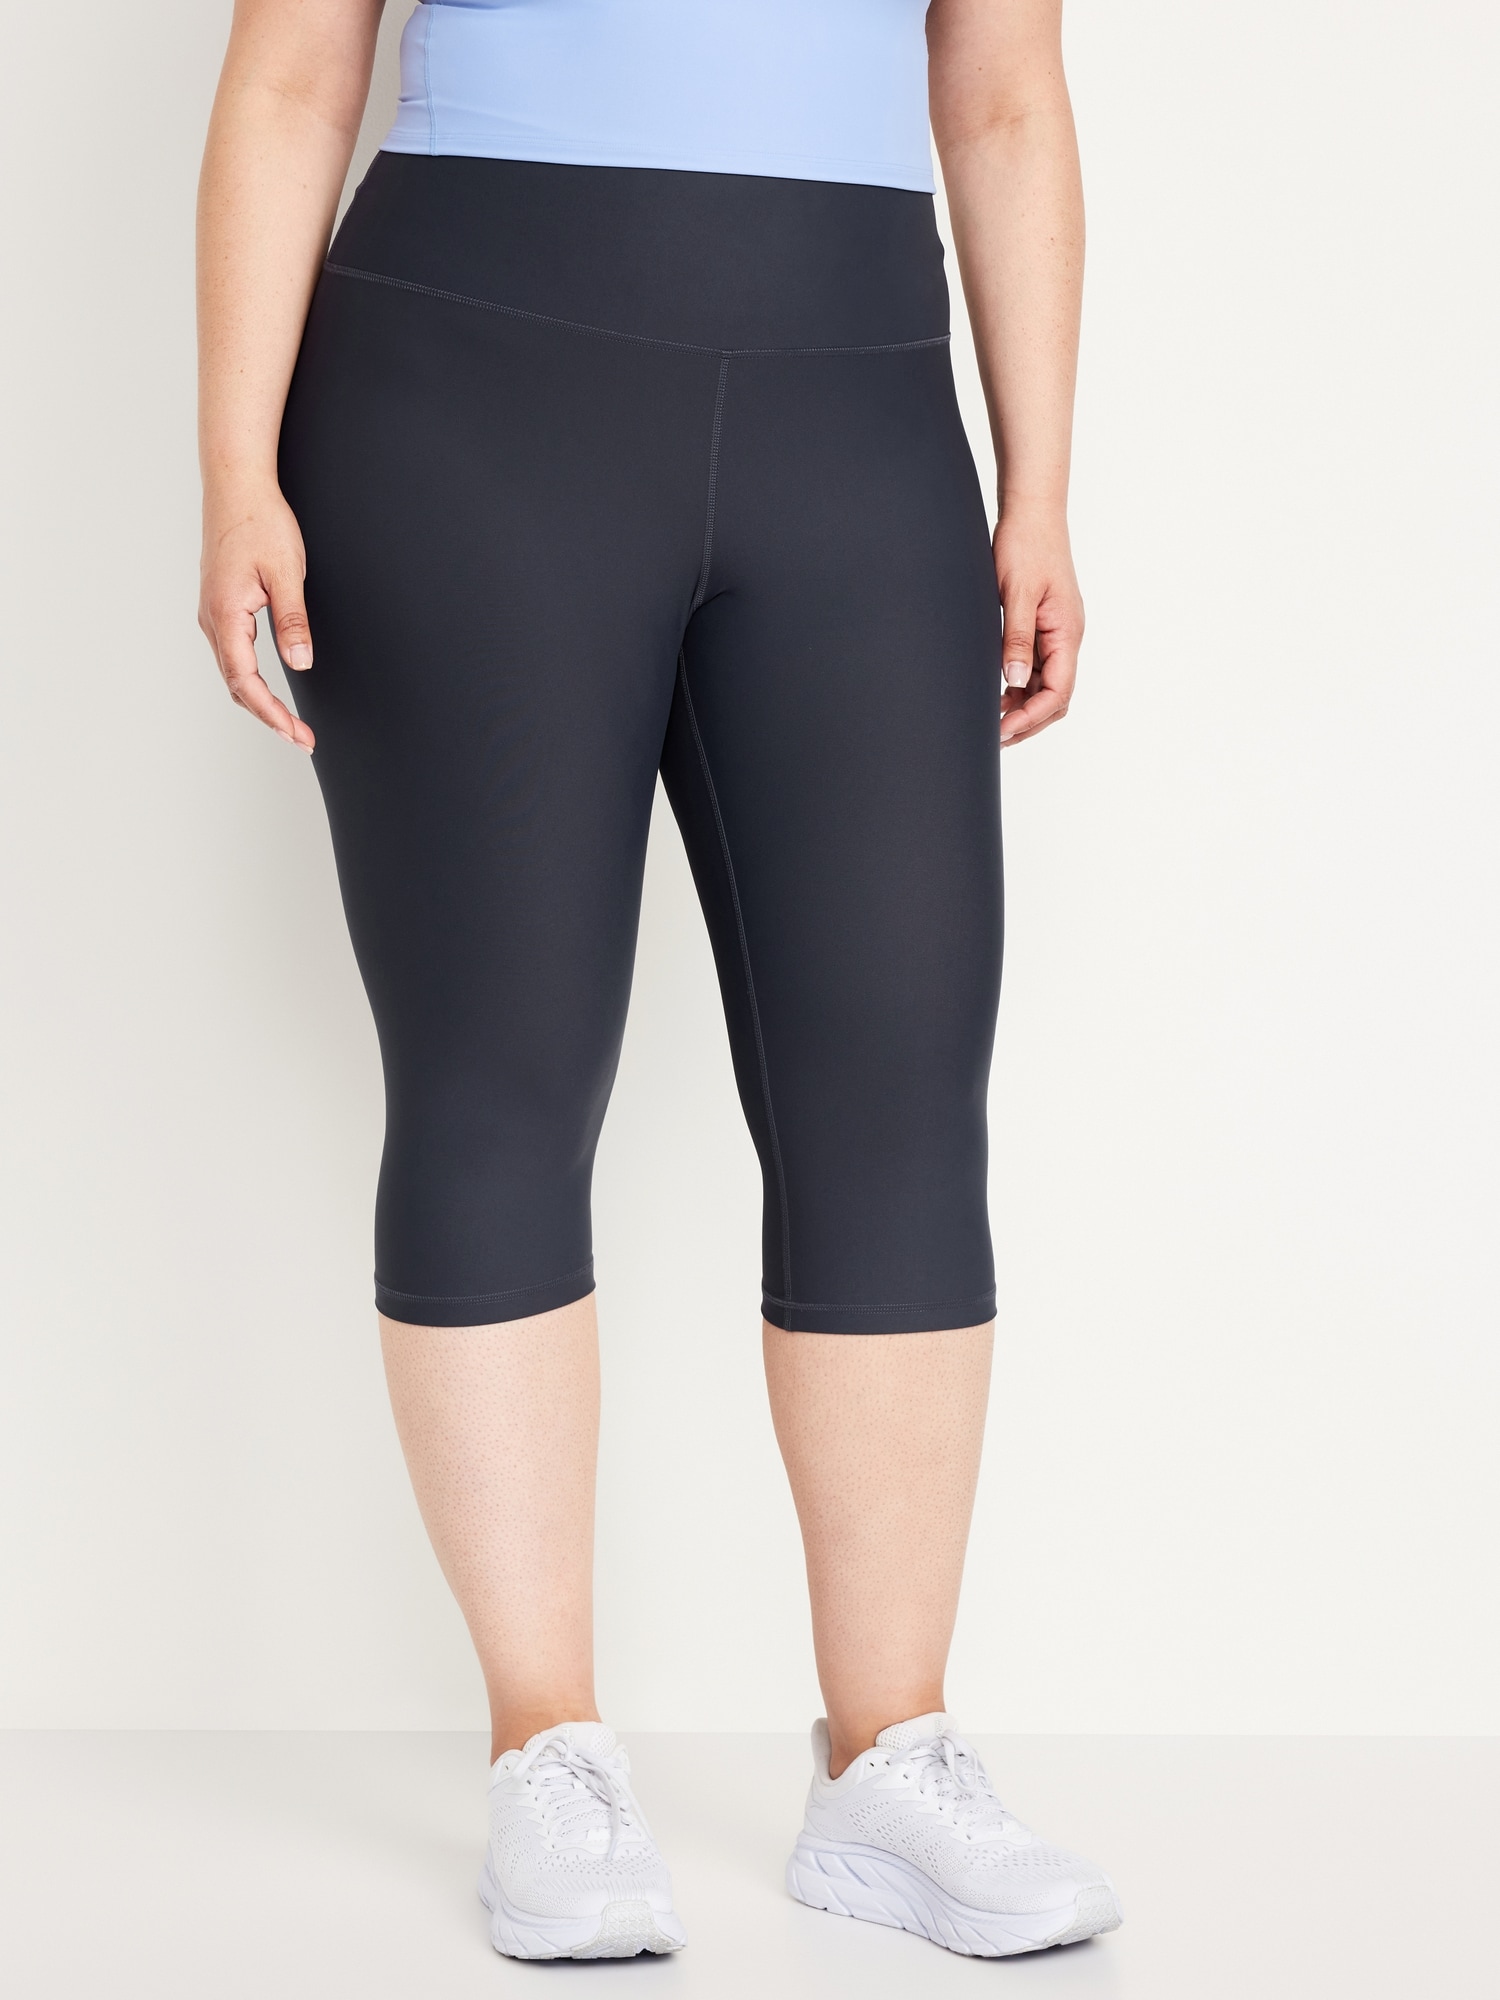 Old Navy High-Waisted Crop Leggings